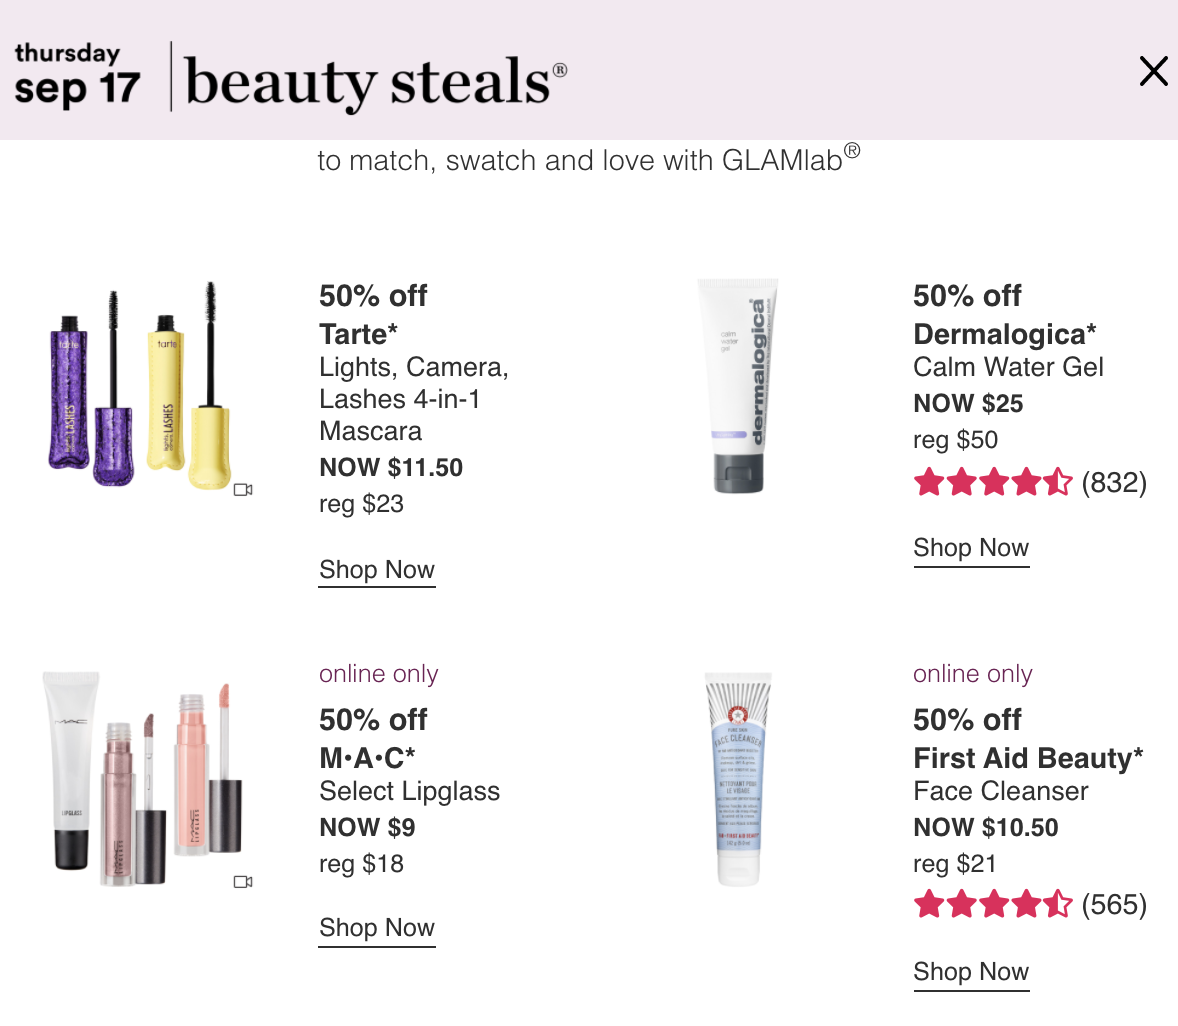 Ulta 21 Days of Beauty - 9/17 DAY 19 (tomorrow) - Gift With Purchase